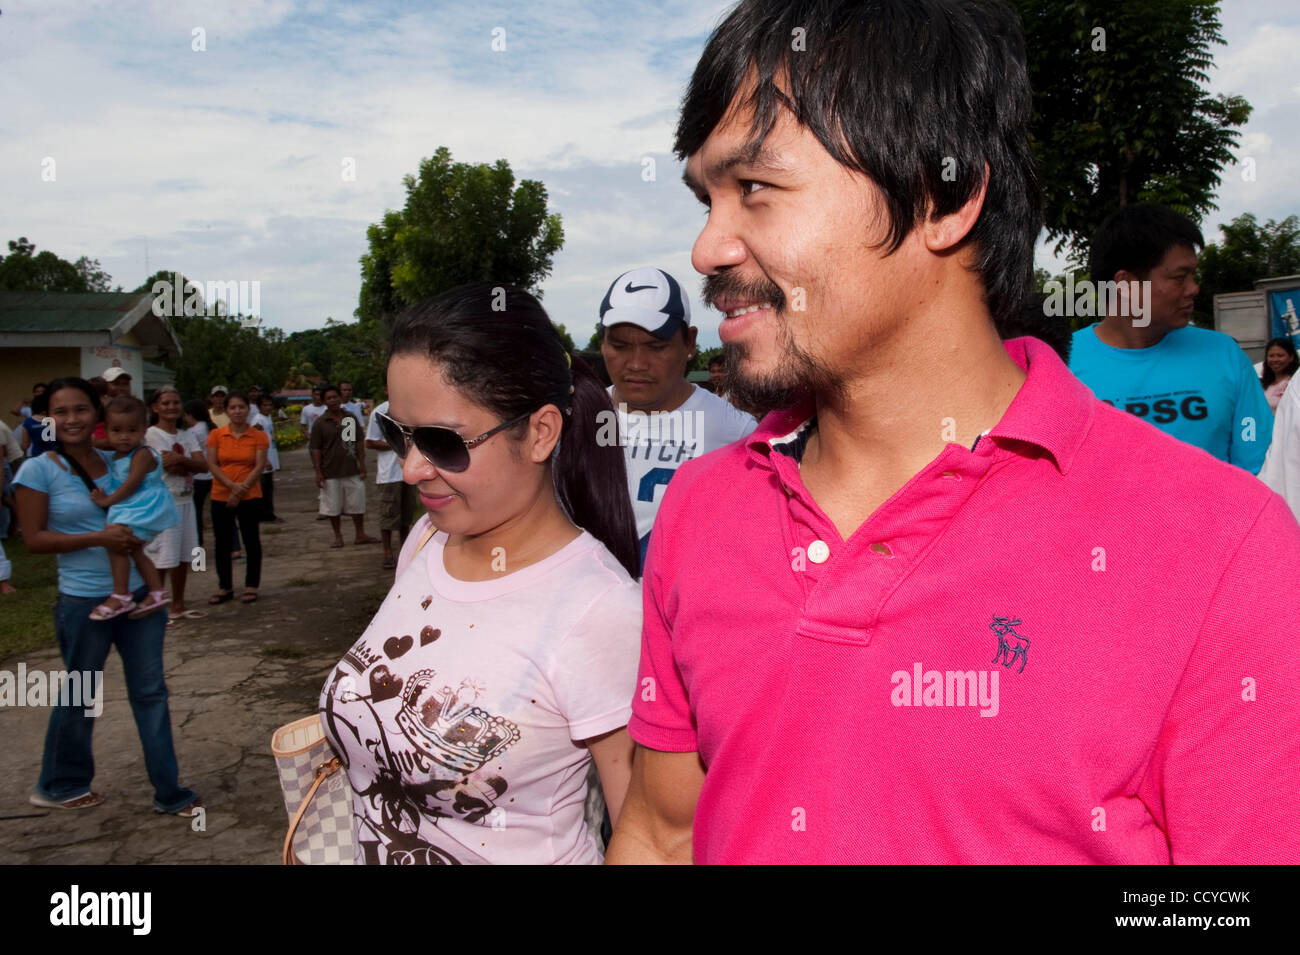 May 09, 2010 - Kiamba, Sarangani, Philippines - Boxing champion Manny Pacquiao accompanied by his wife Jinkee Jamora greet supporters as they exit polling station during the Philippine national and local elections on 10 May 2010 in Kiamba, Sarangani Philippines..Manny Pacquiao is running for the con Stock Photo